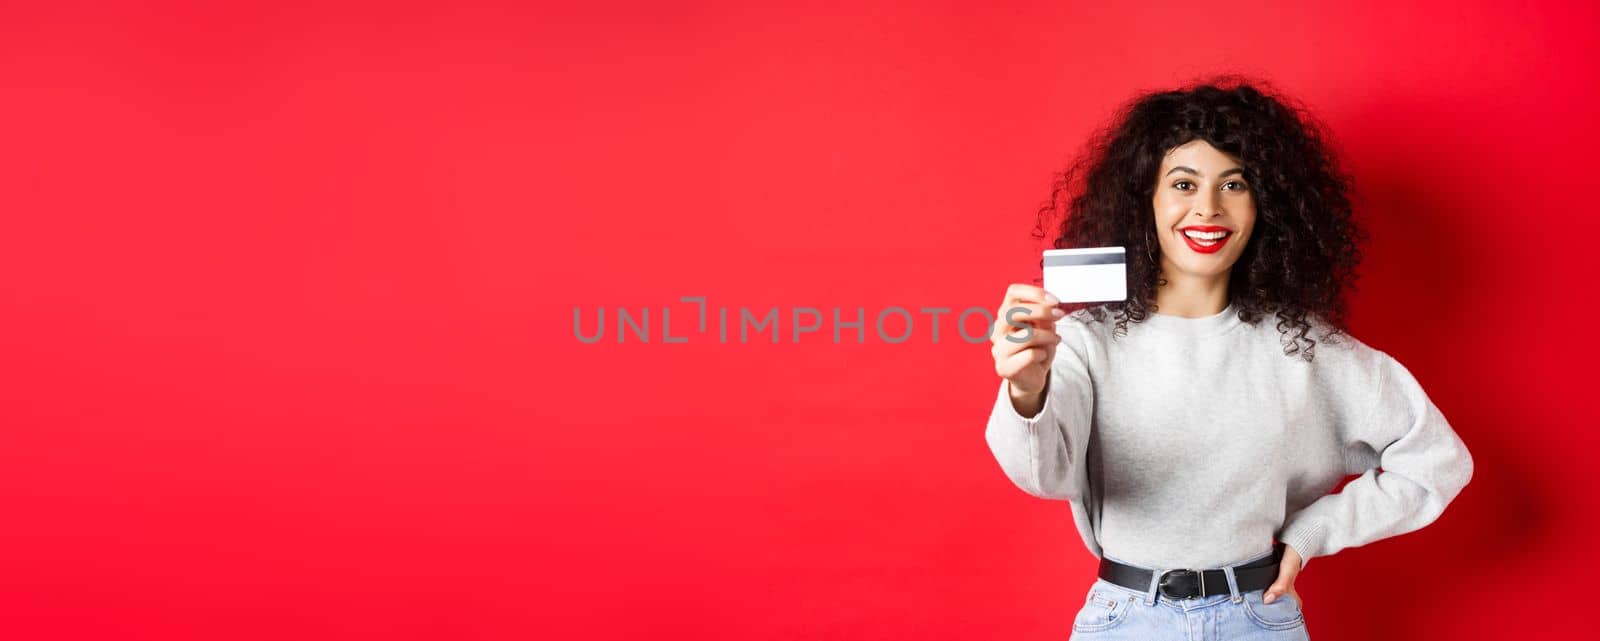 Image of modern woman with curly hair, extending hand and showing plastic credit card, recommending bank or shopping offer, red background by Benzoix